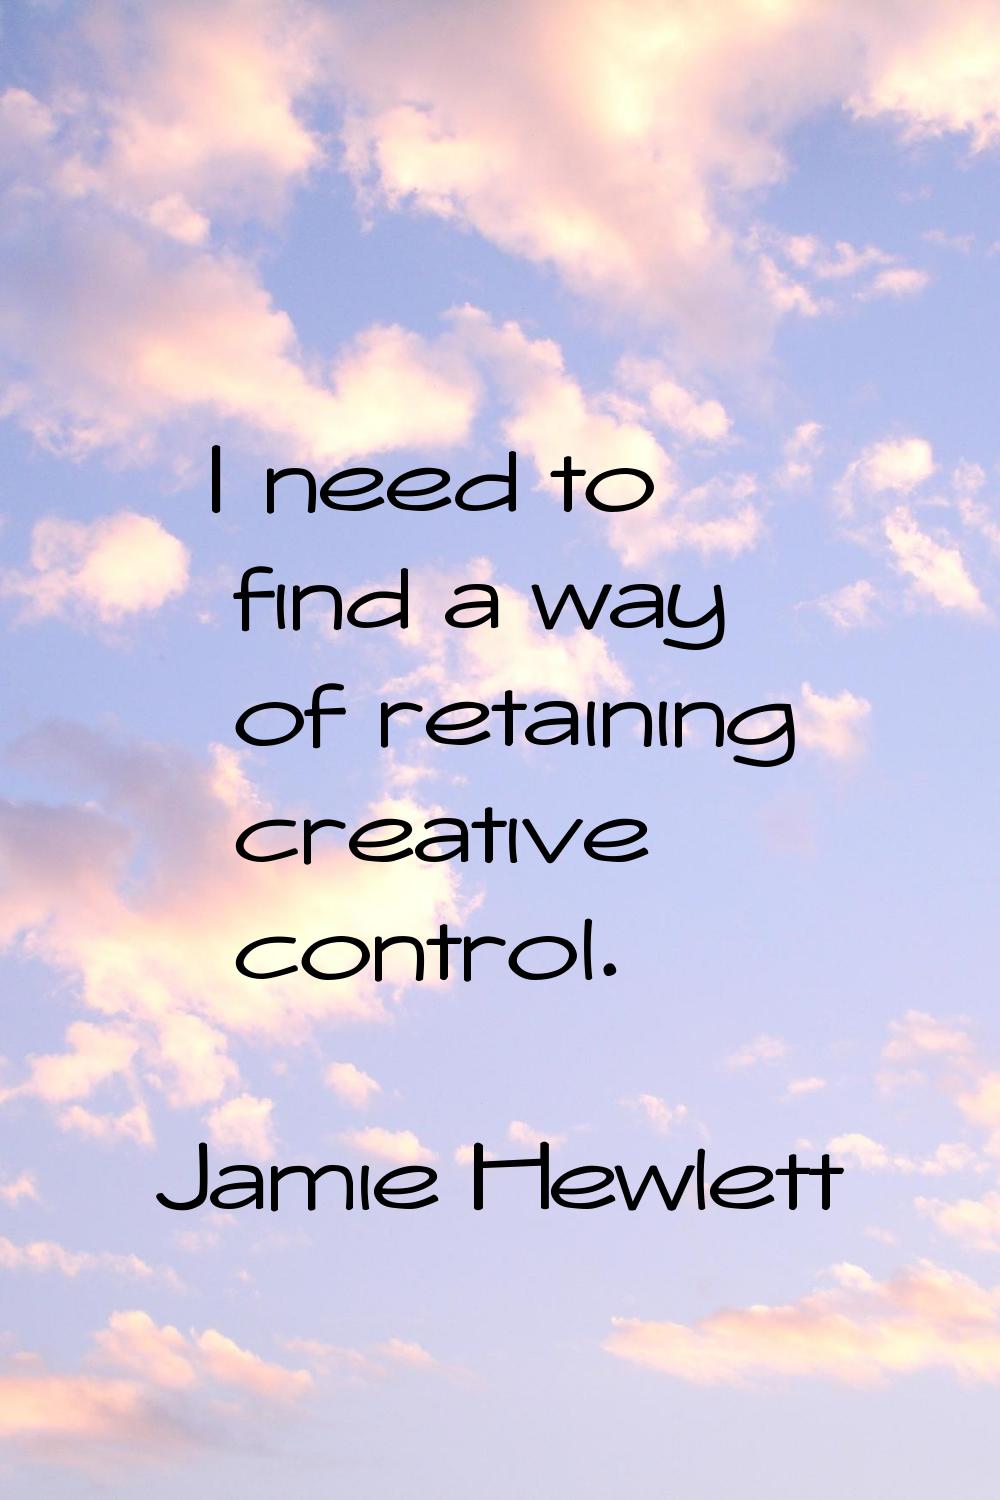 I need to find a way of retaining creative control.